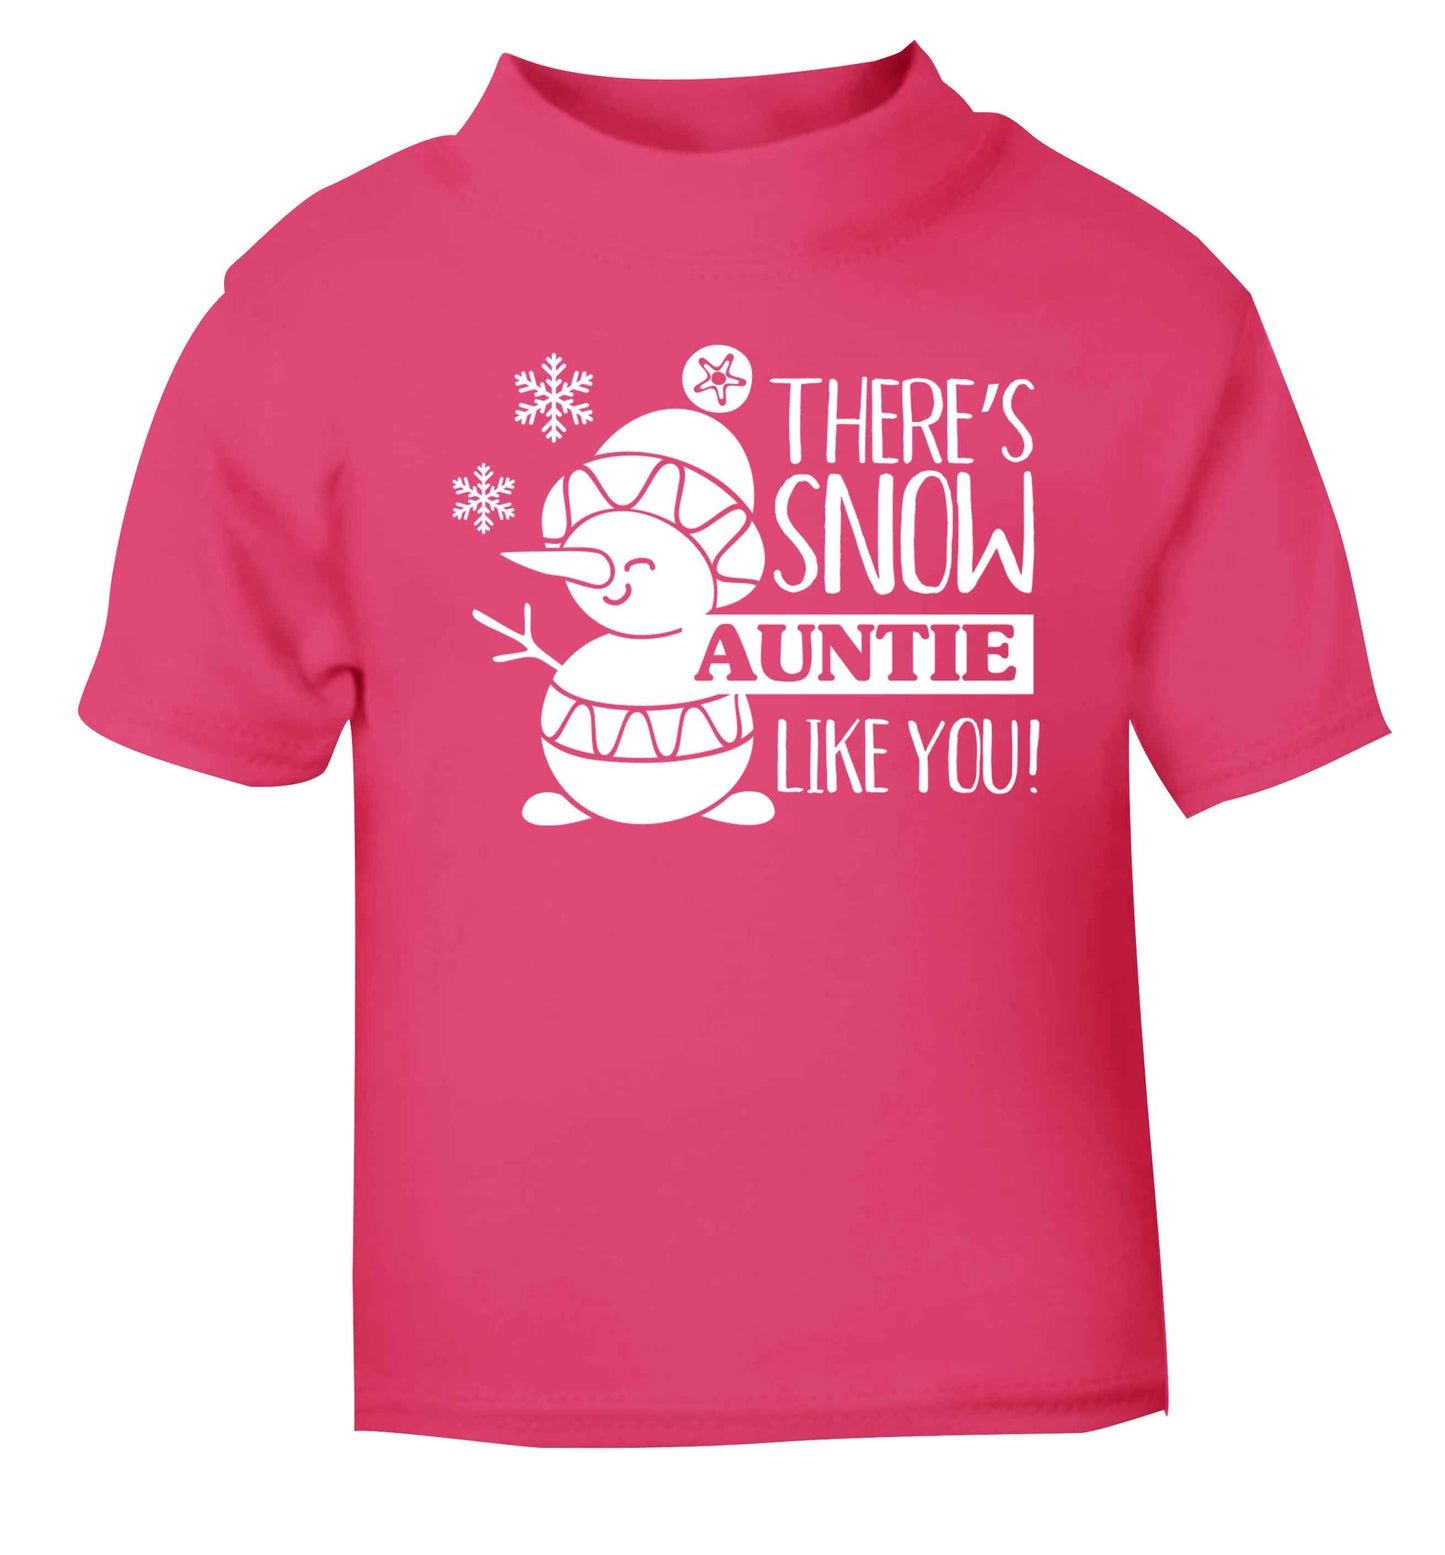 There's snow auntie like you pink baby toddler Tshirt 2 Years